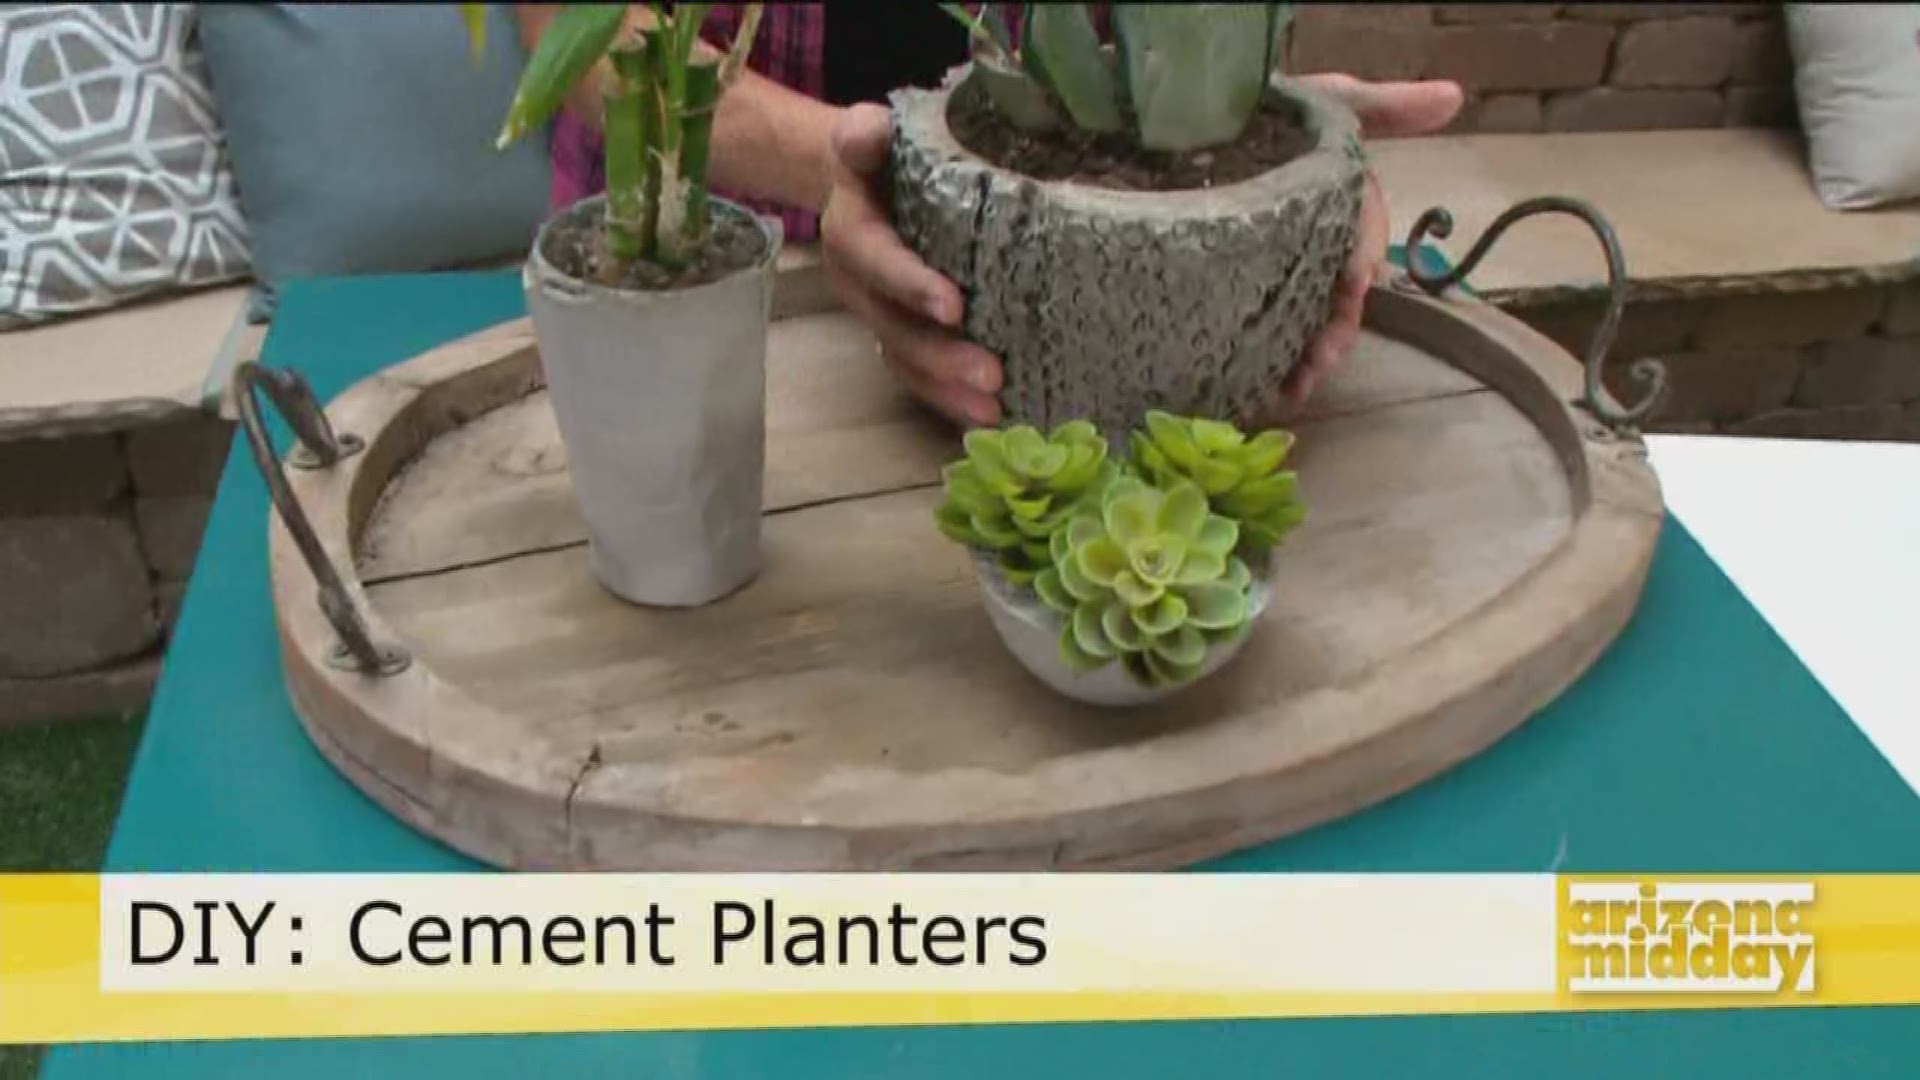 Jan show us how to create a cement planter at home